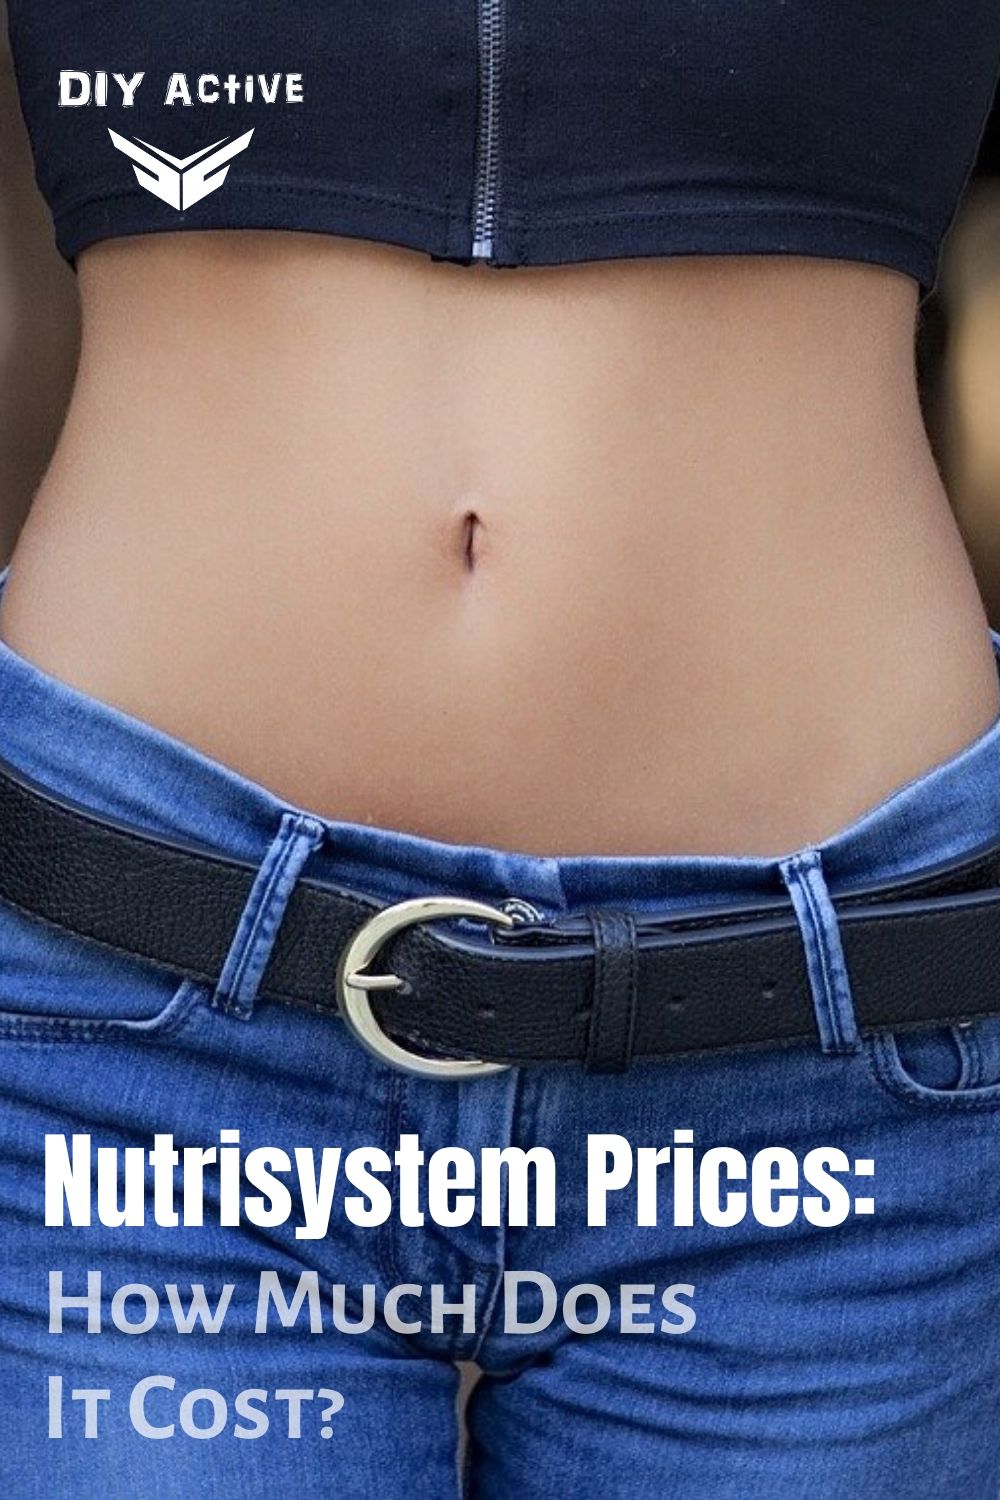 Nutrisystem Prices: How Much Does Their Meal Delivery Cost?